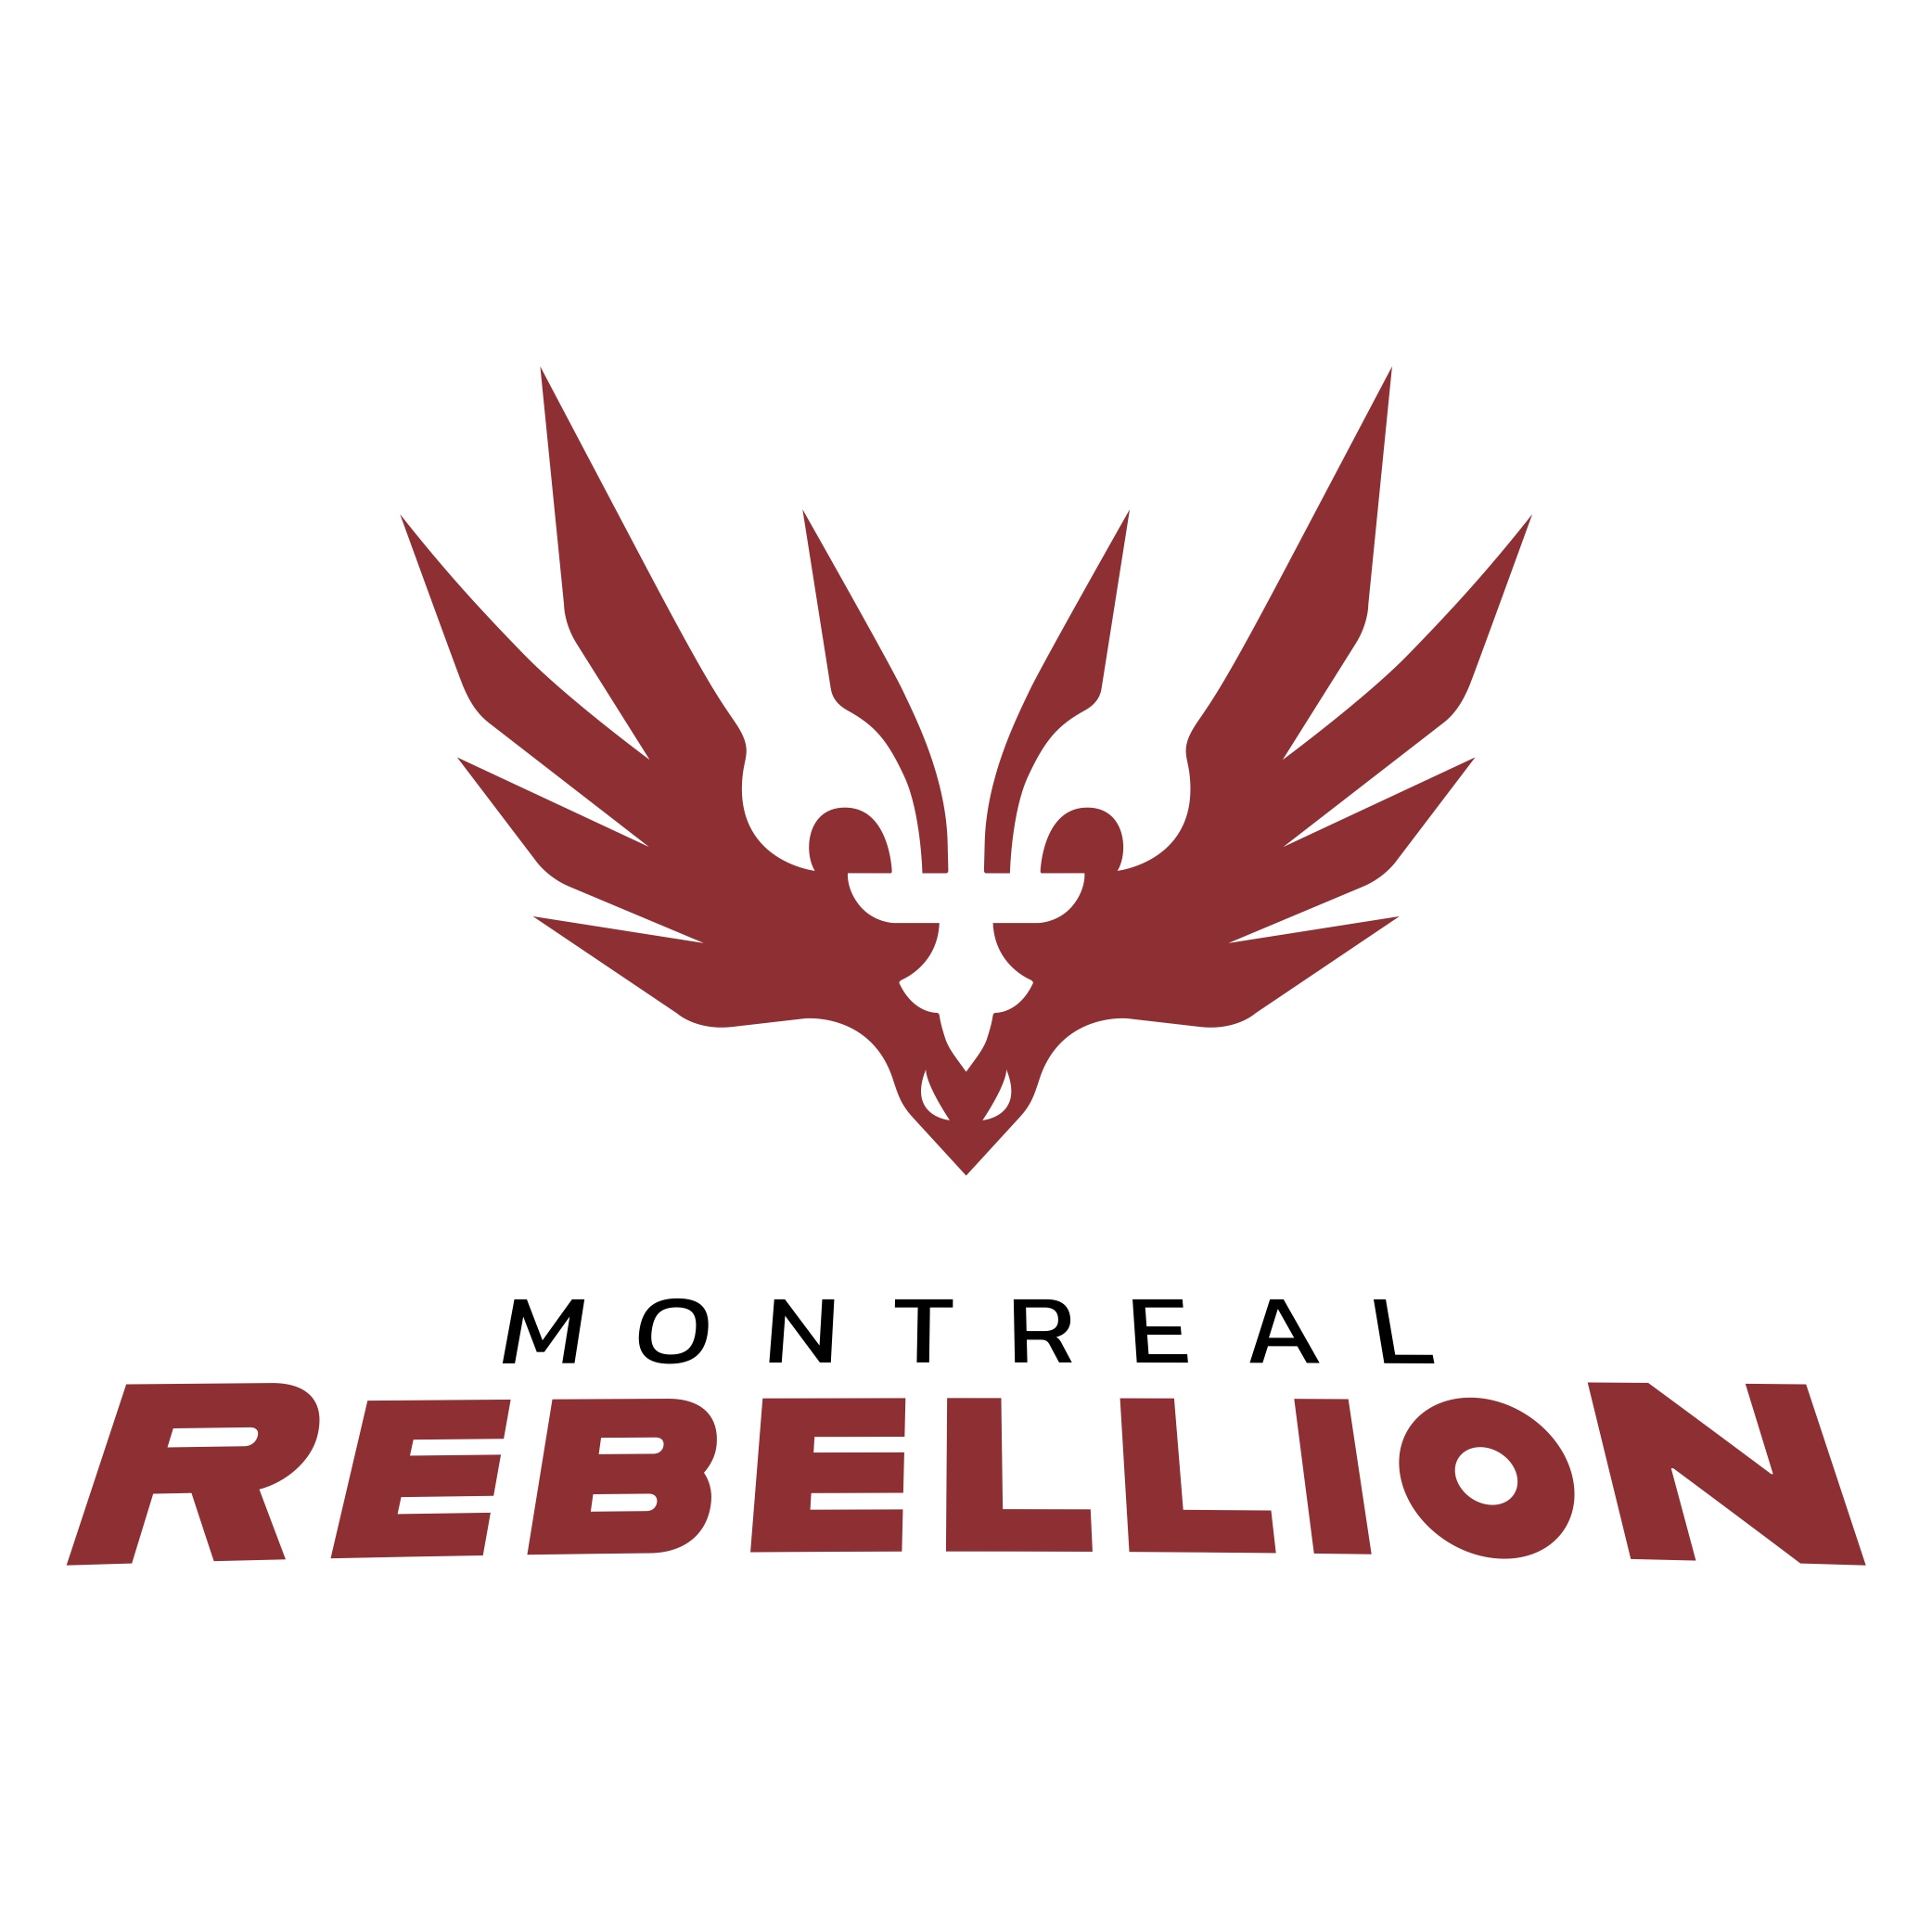 New Montreal Rebellion logo unveiled at media event in Montreal